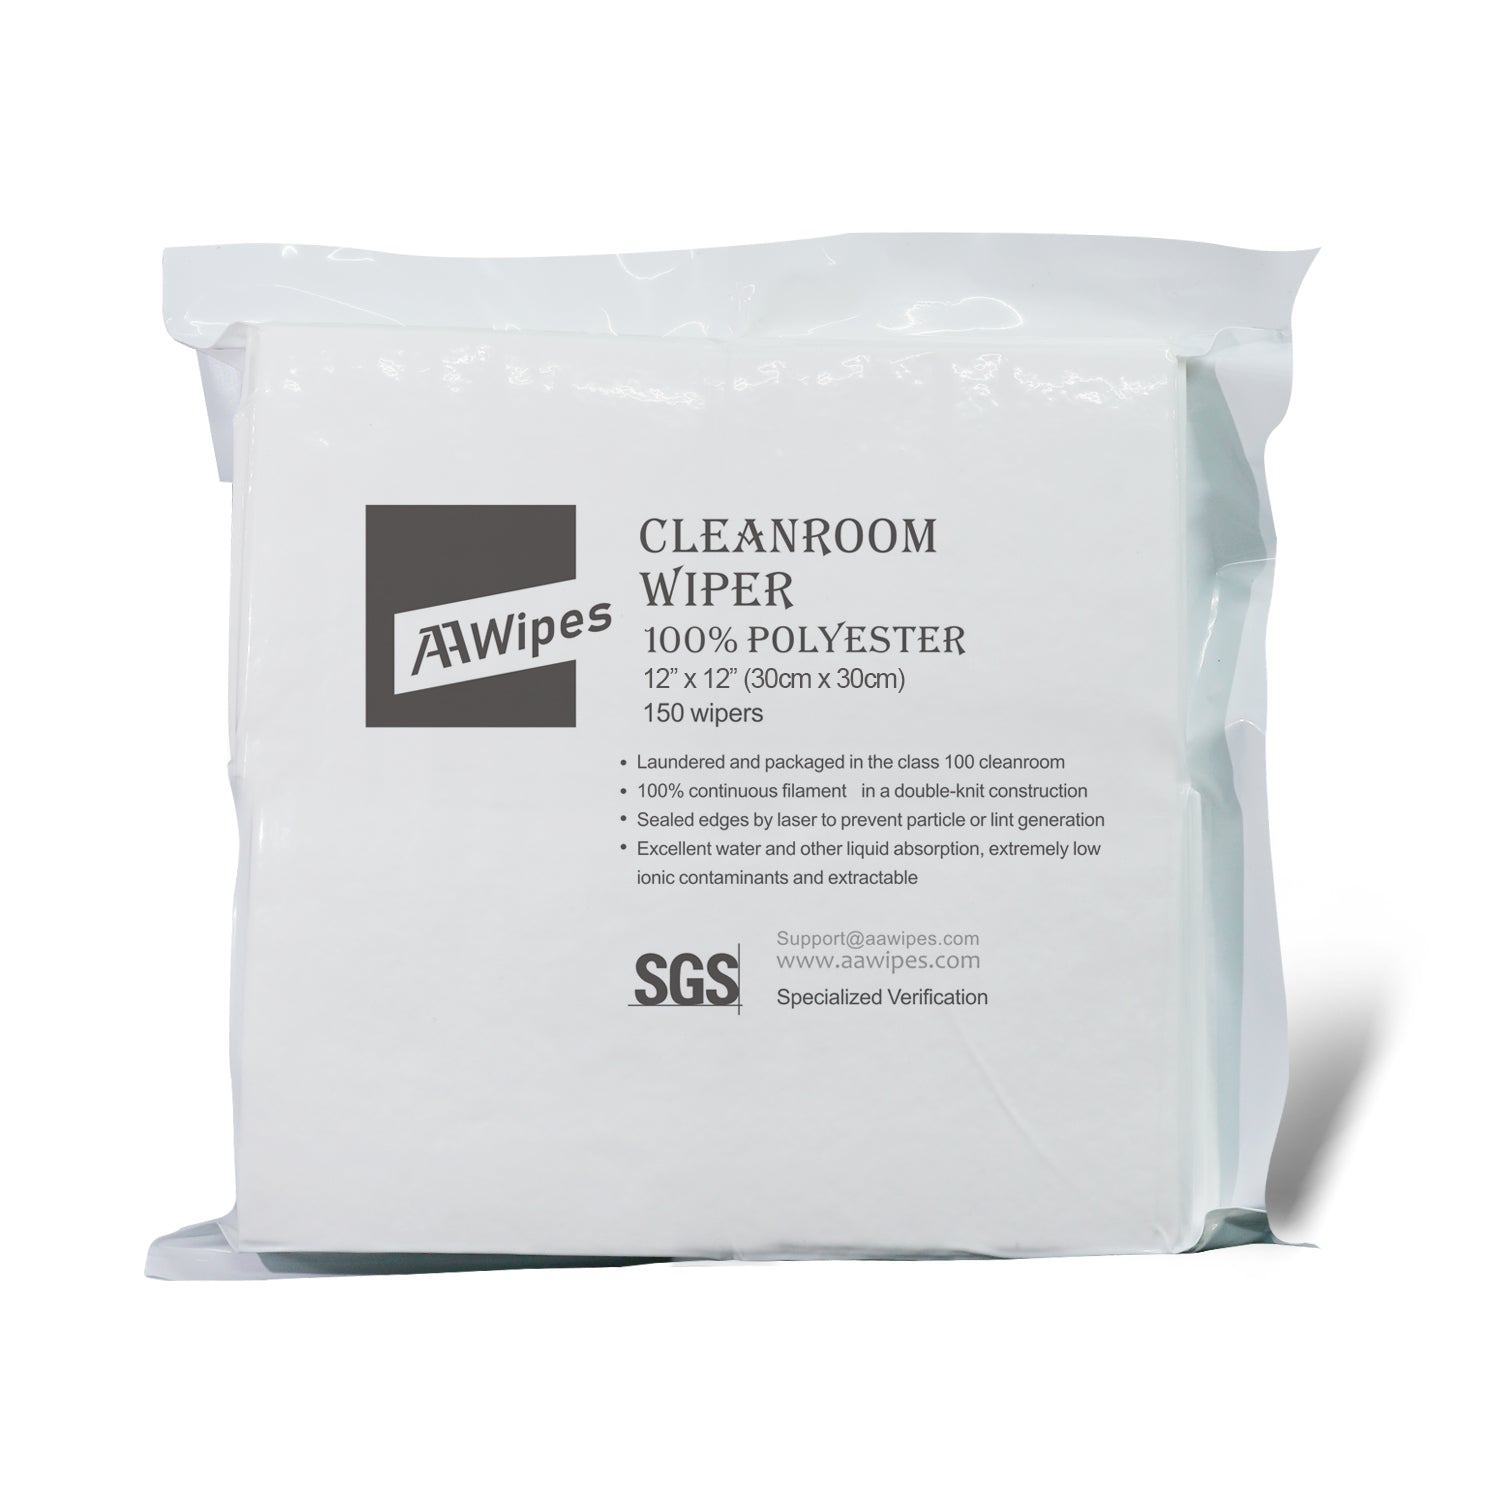 Cleanroom Double Knit 100% Polyester Wipers 12"x12" (Starting at 1 Box with 1,200 Wipes per 8 Bags) (No. CP14012)